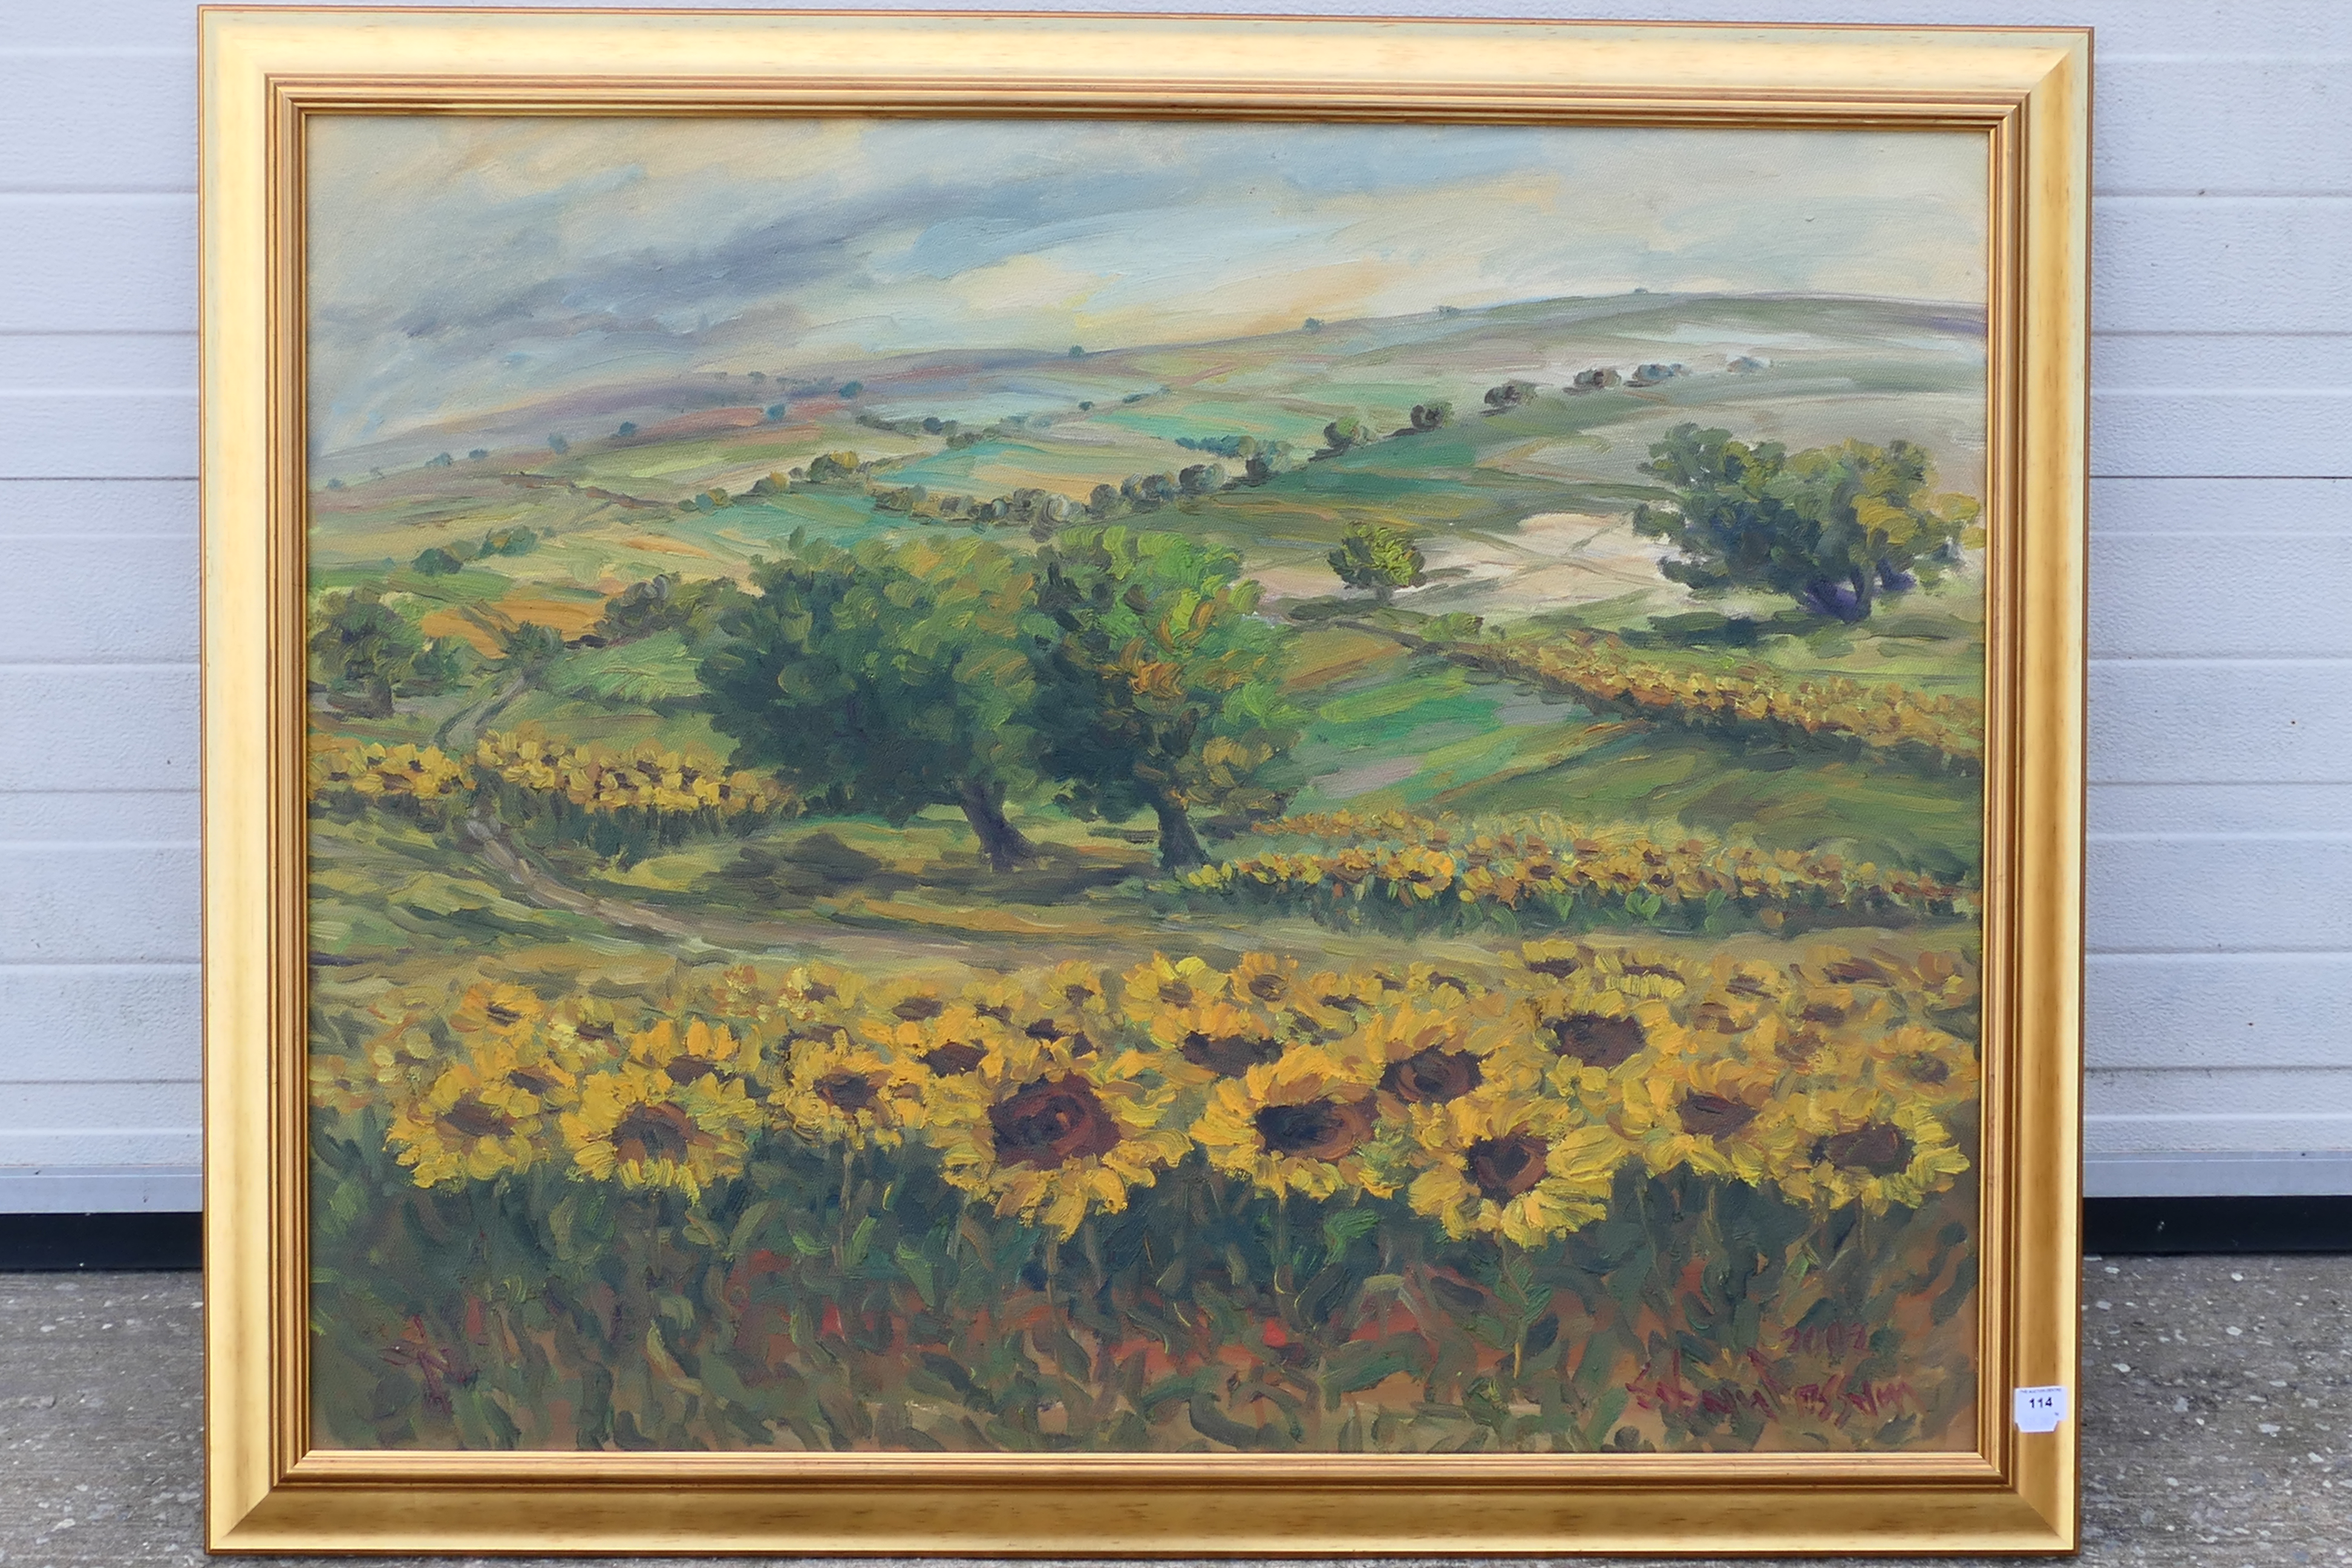 A large oil on canvas landscape scene depicting fields of sunflowers,